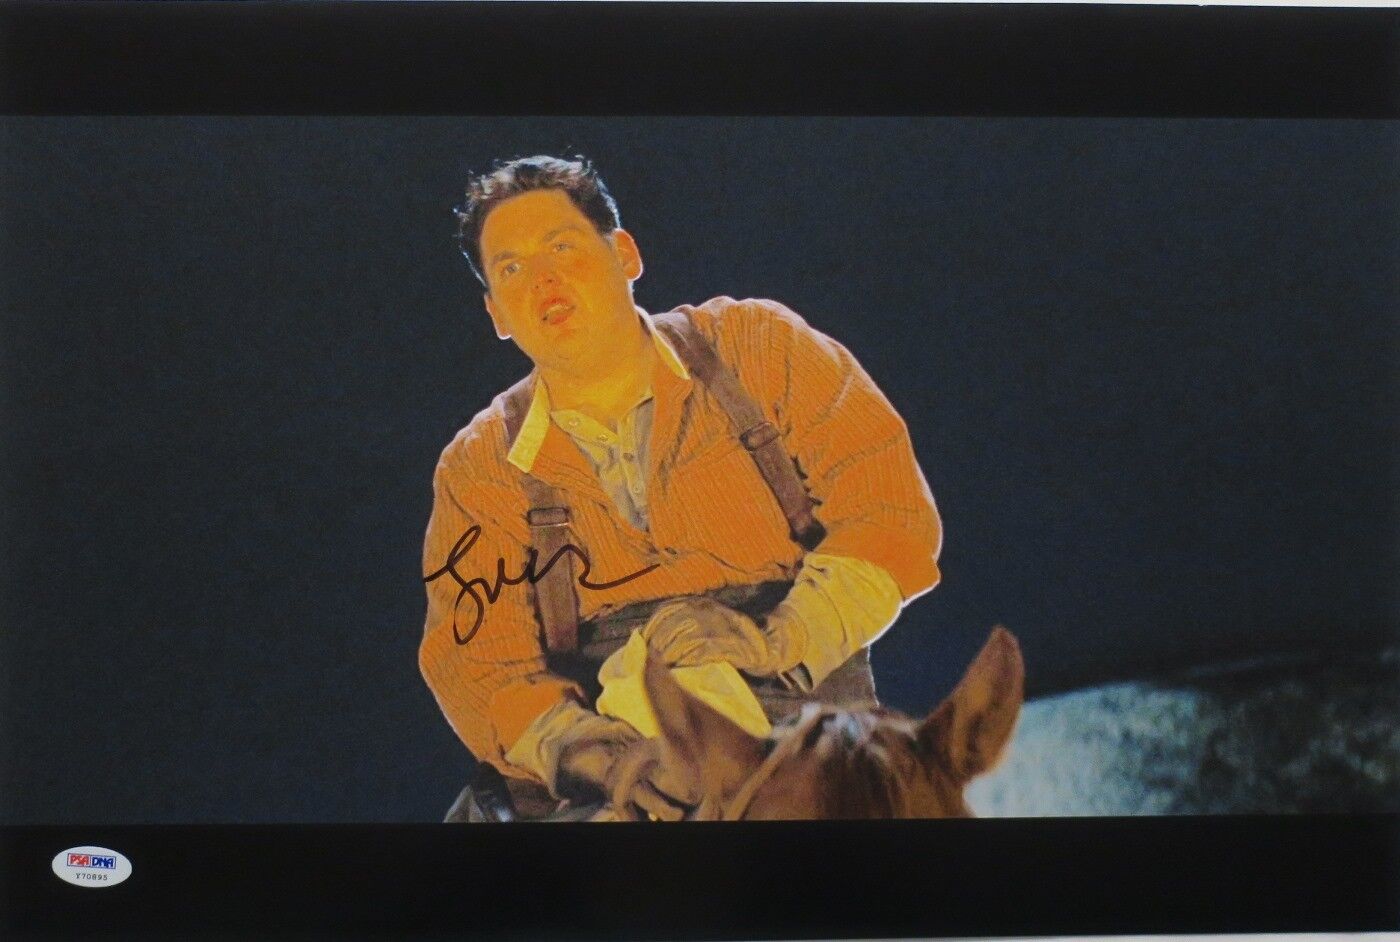 Jonah Hill Signed Django Unchained Autographed 12x18 Photo Poster painting PSA/DNA #Y70895